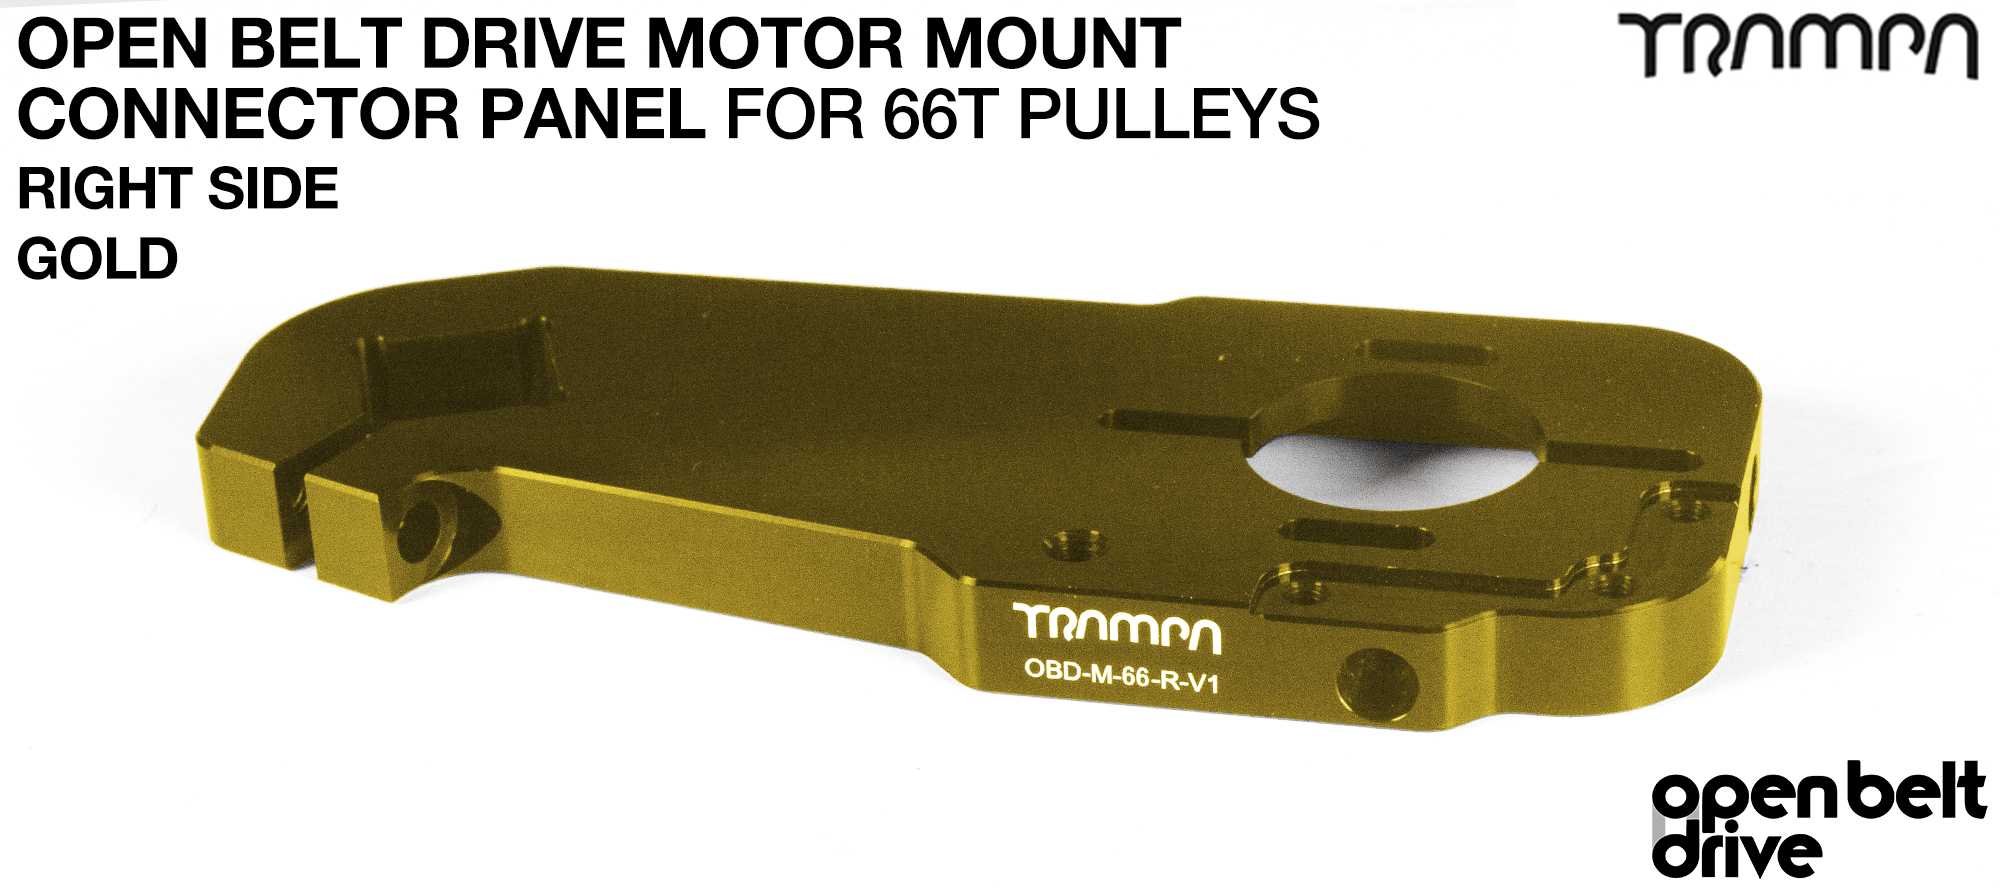 OBD Open Belt Drive Motor Mount Connector Panel for 66 tooth Pulleys - GOOFY - GOLD